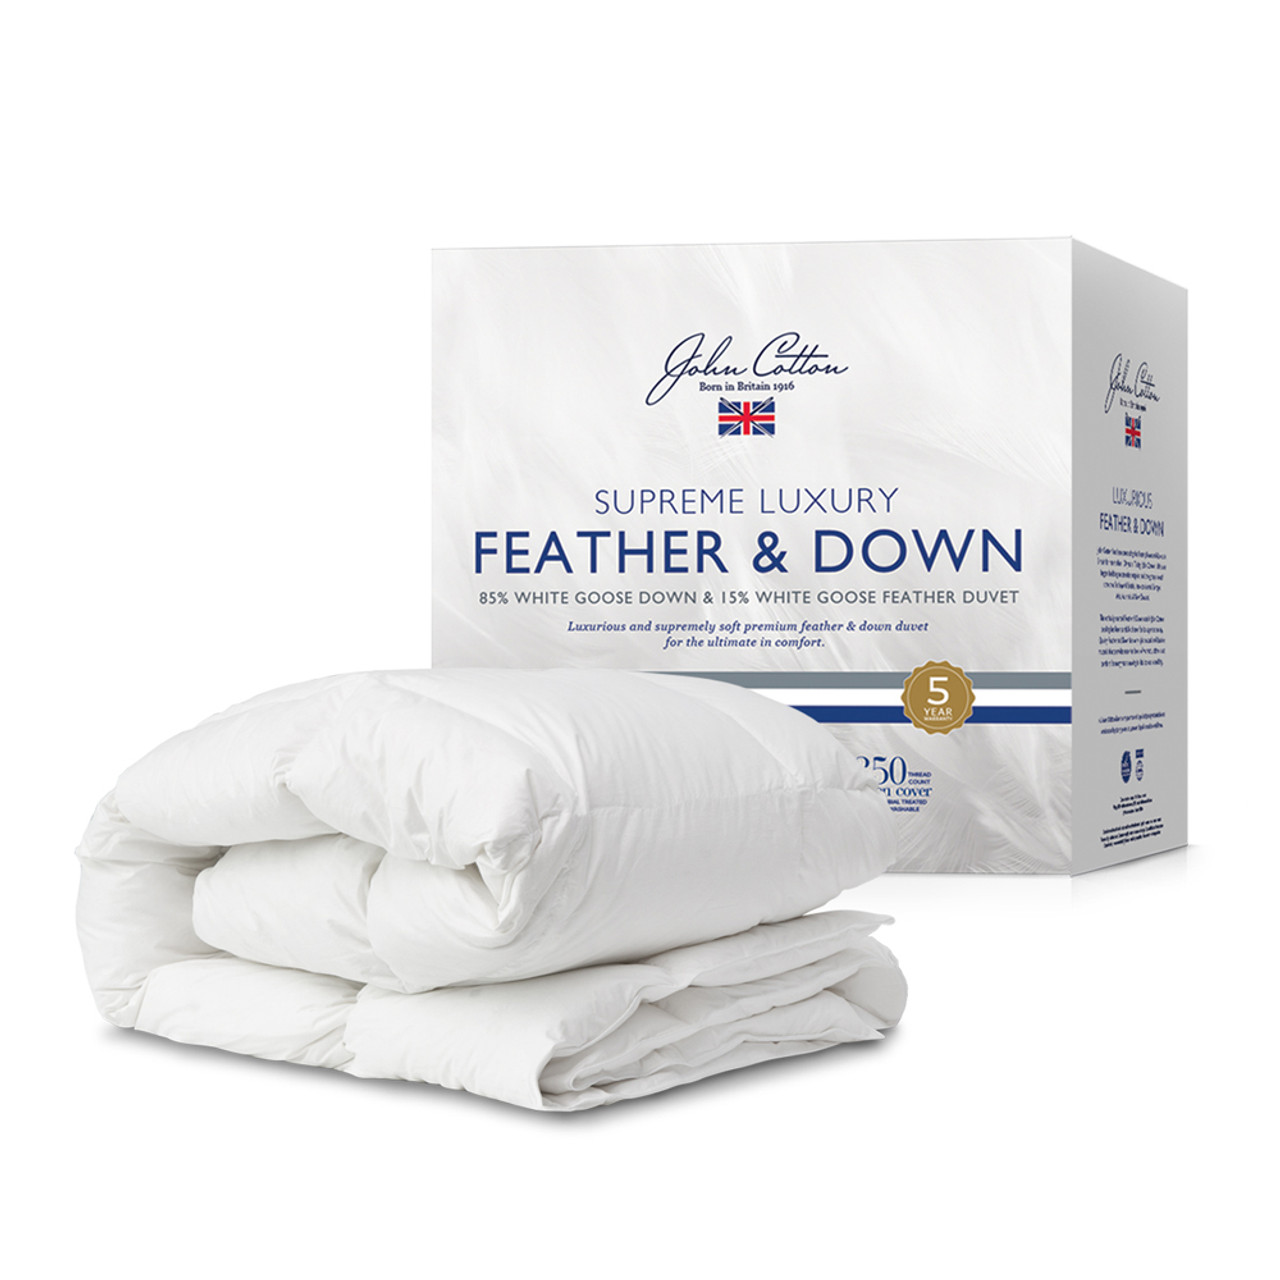 John Cotton Supreme 85 15 Goose Down Feather Quilt King Bed